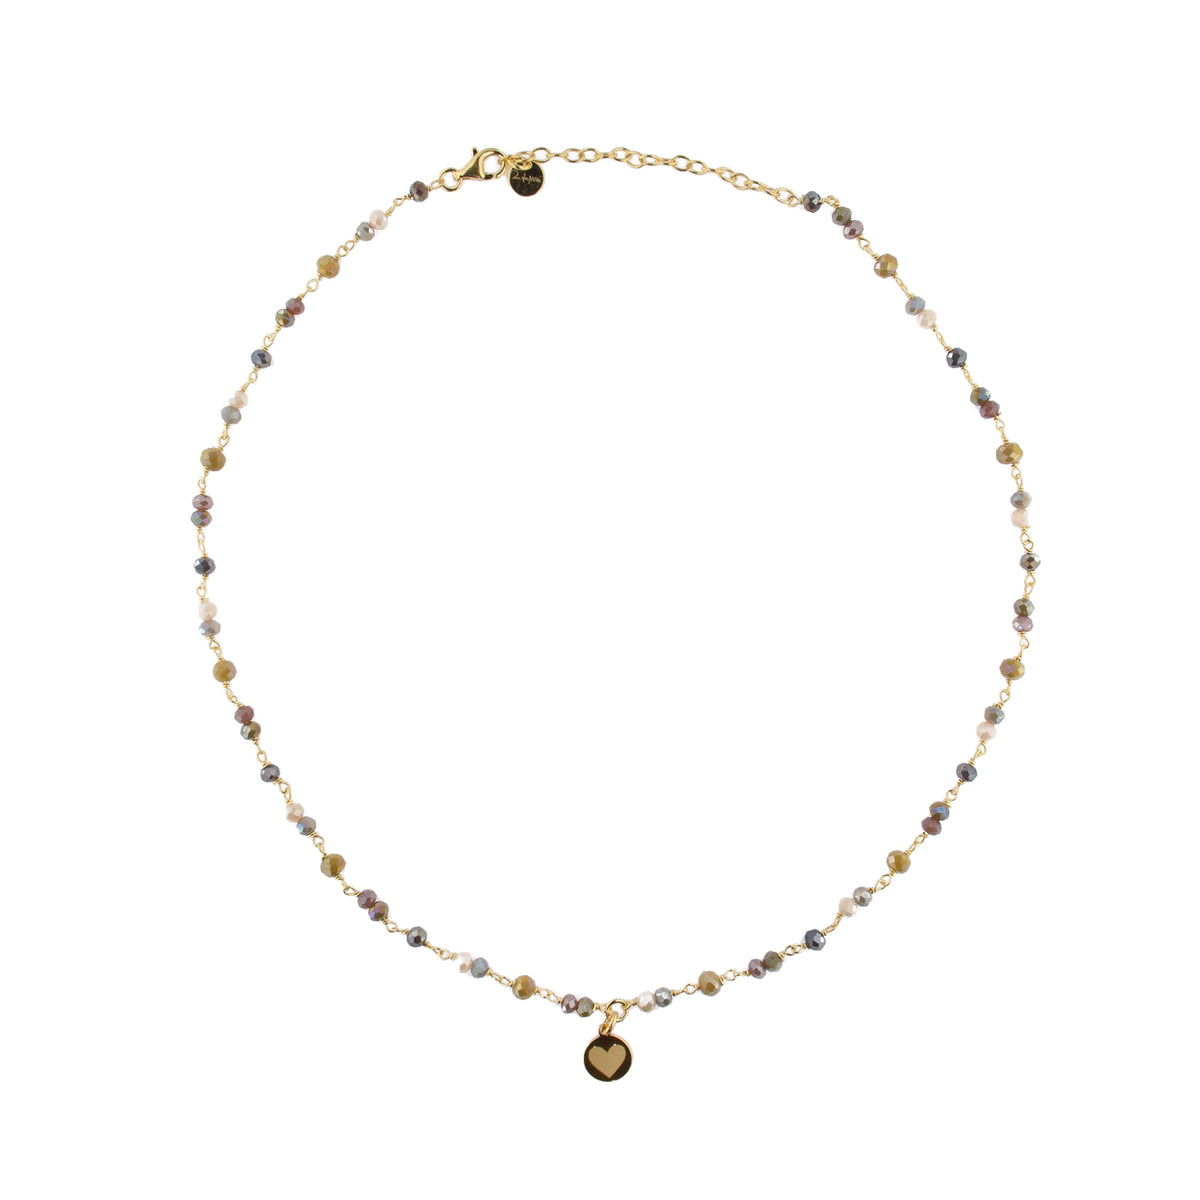 Chokers - CHAINED STONES NECKLACE - GIPSY TIERRA - 1 | Rue des Mille